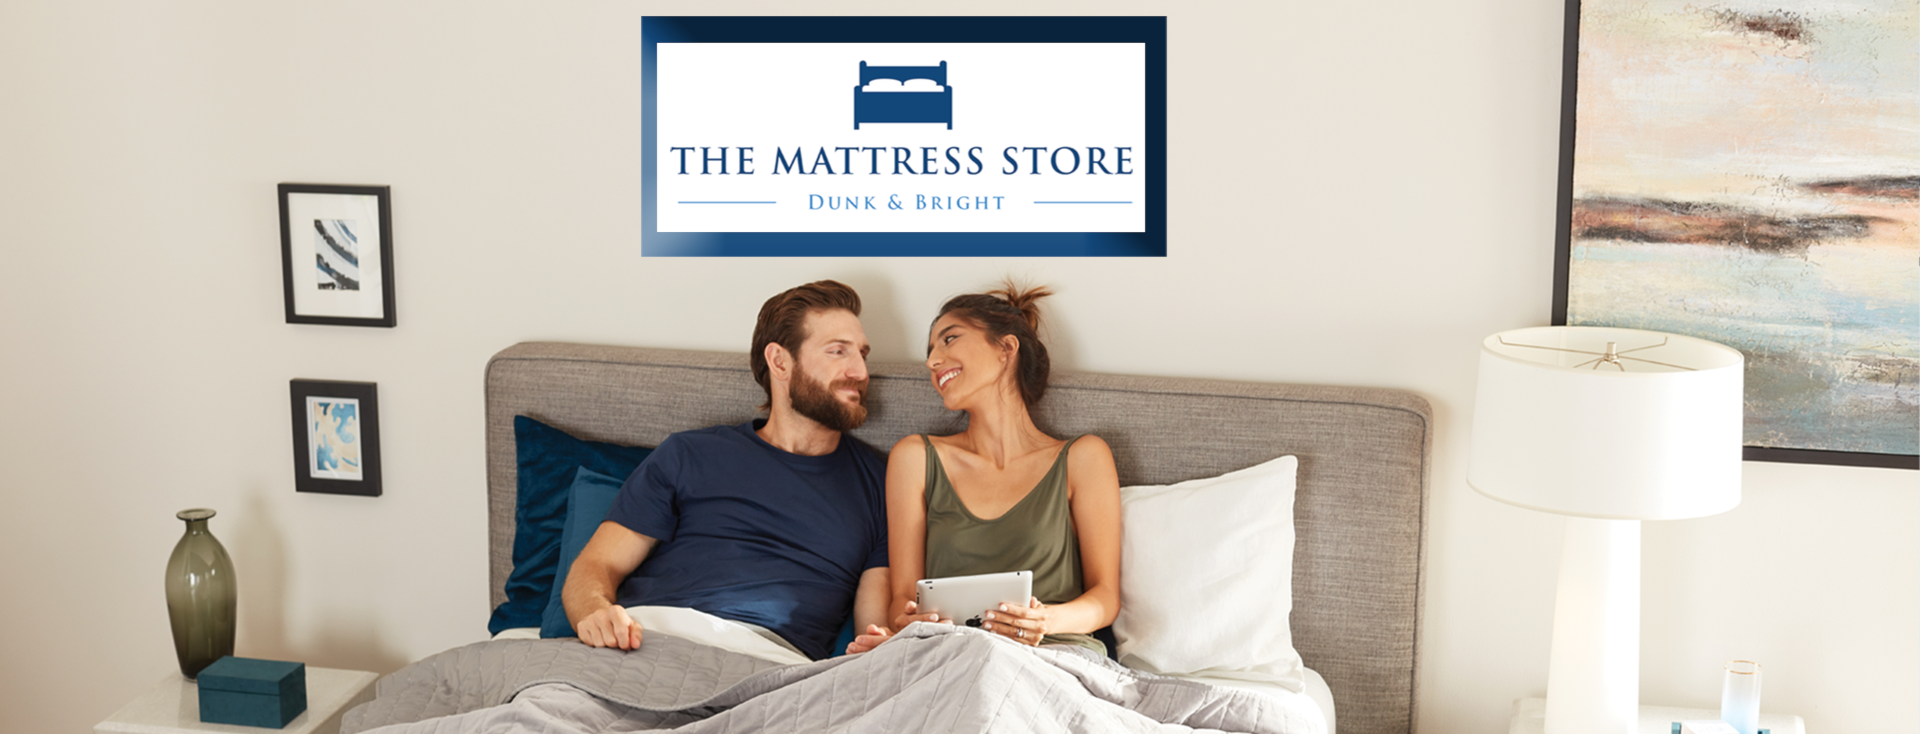 Click here to browse our mattress selection.  We have over 40 mattresses on display in our store